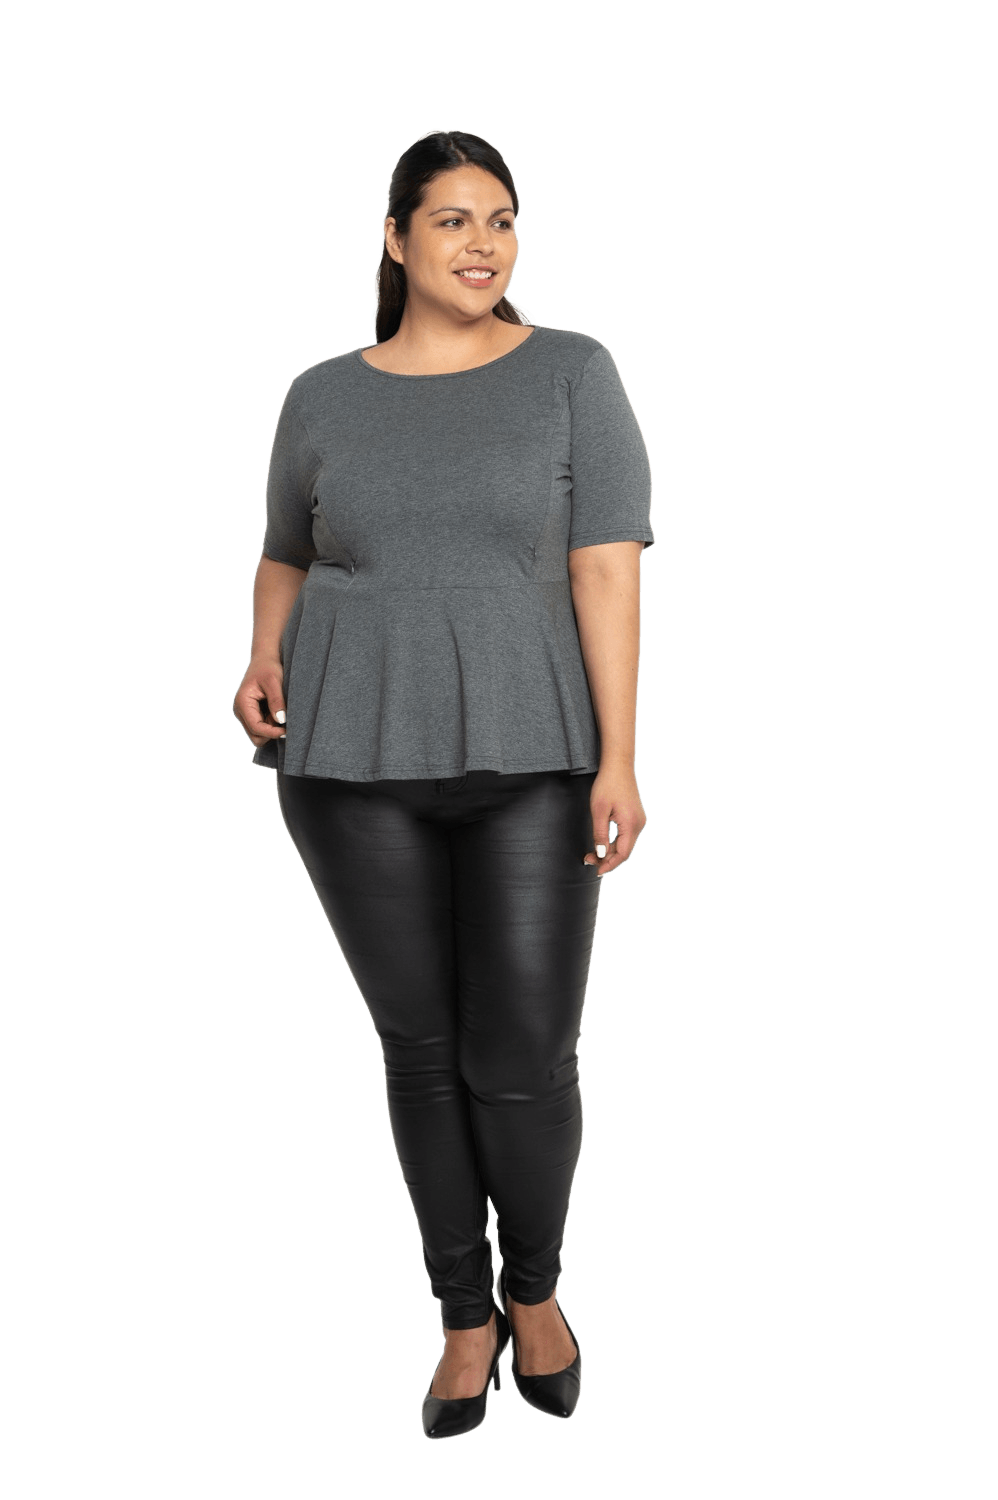 Curvy model facing camera wearing charcoal grey short sleeved top. Featuring rounded neckline and peplum tier under bust. Isla available in sizes 6-26